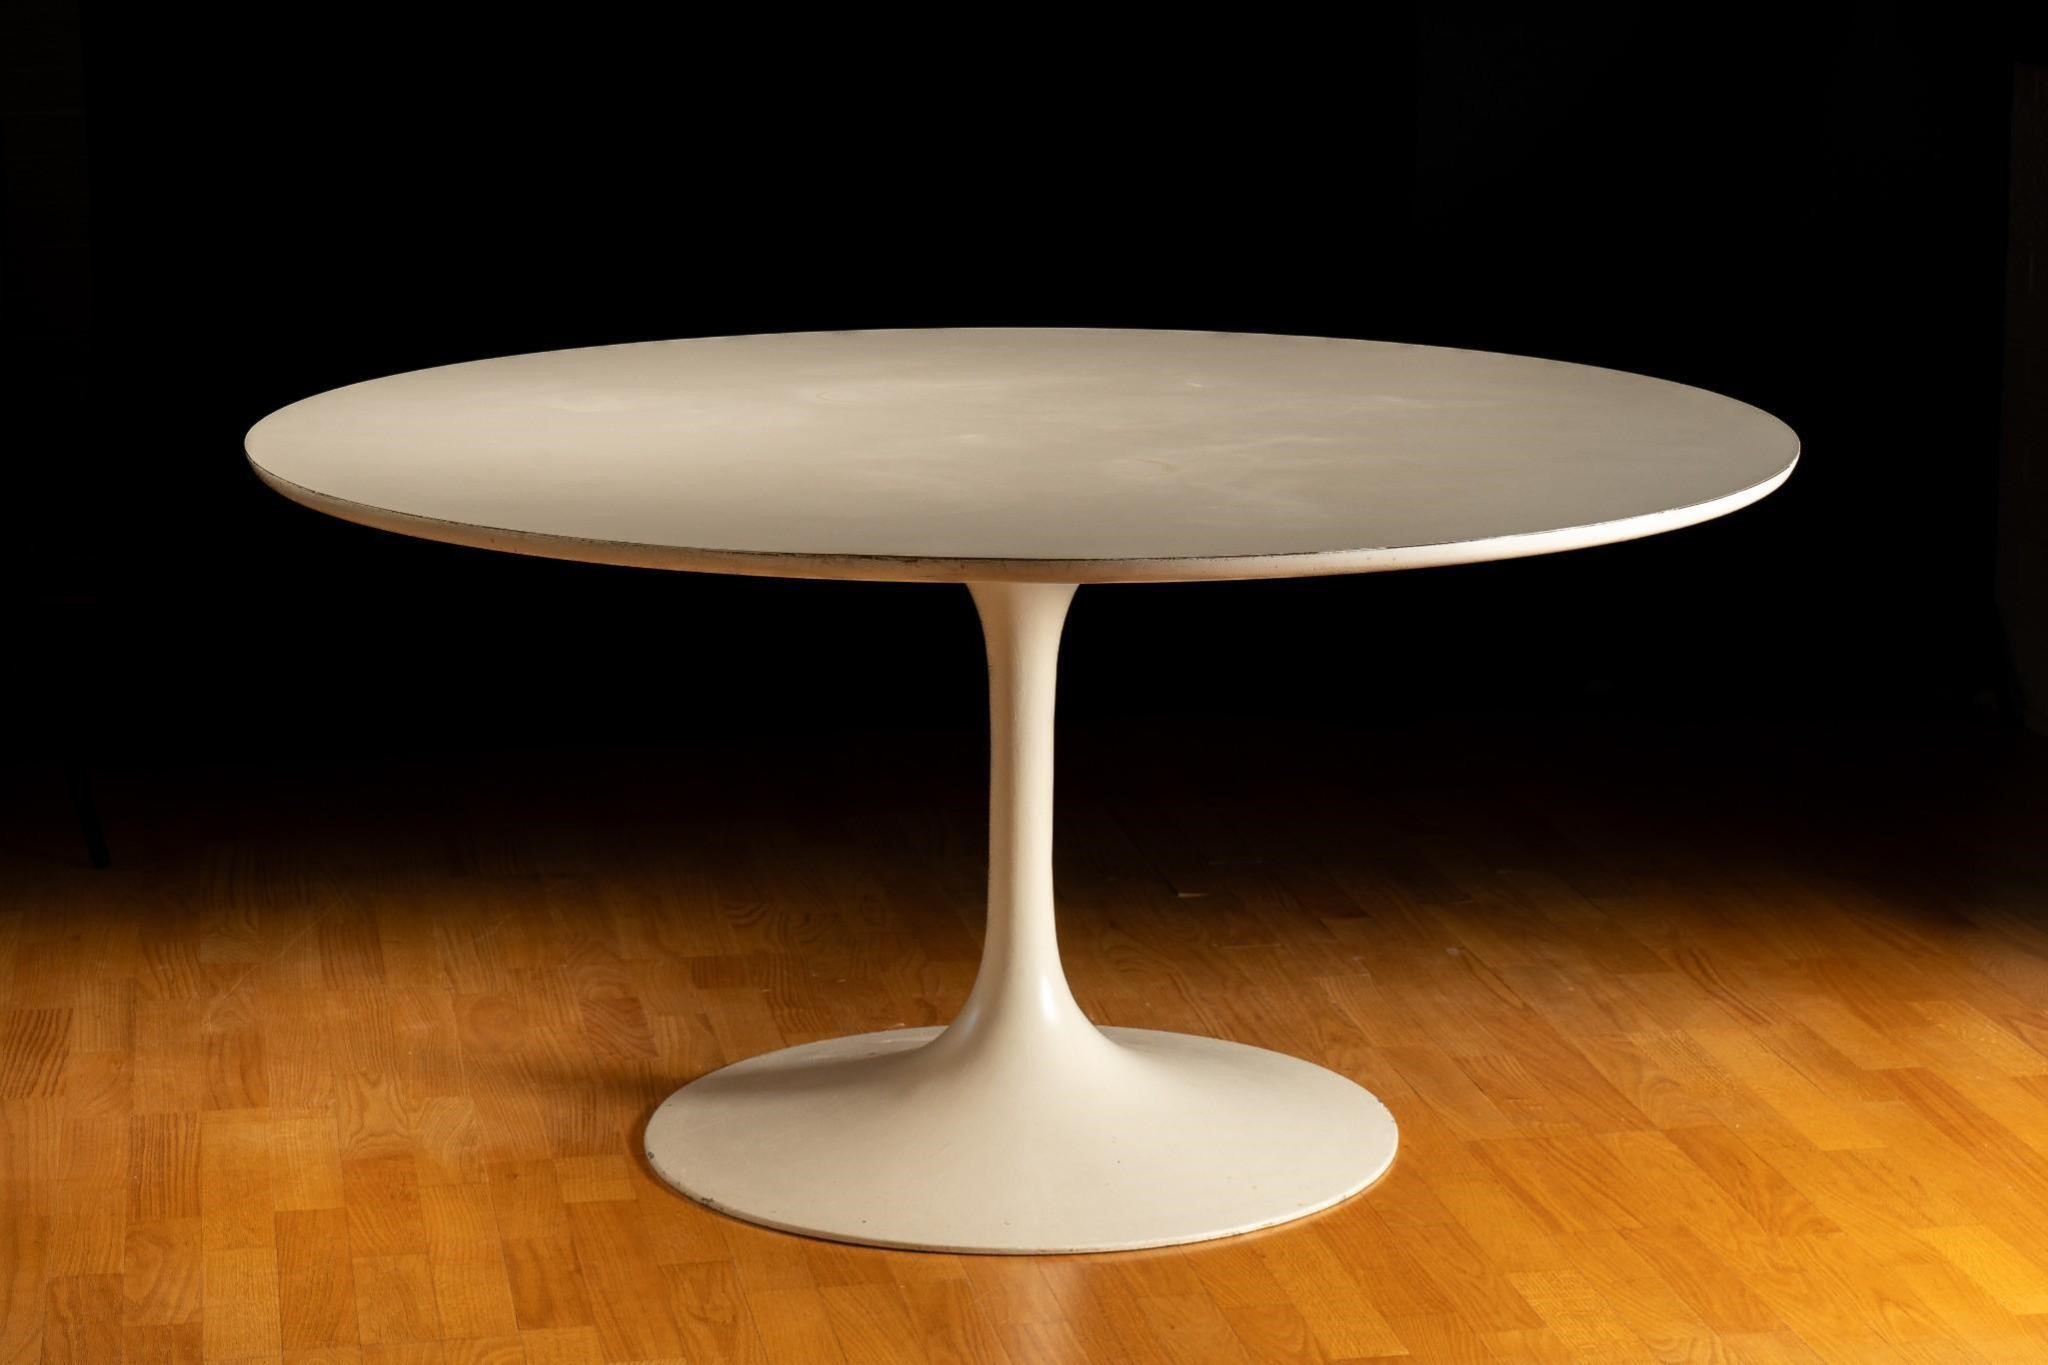 Tulip Dining Table attributed to Saarinen, Knoll